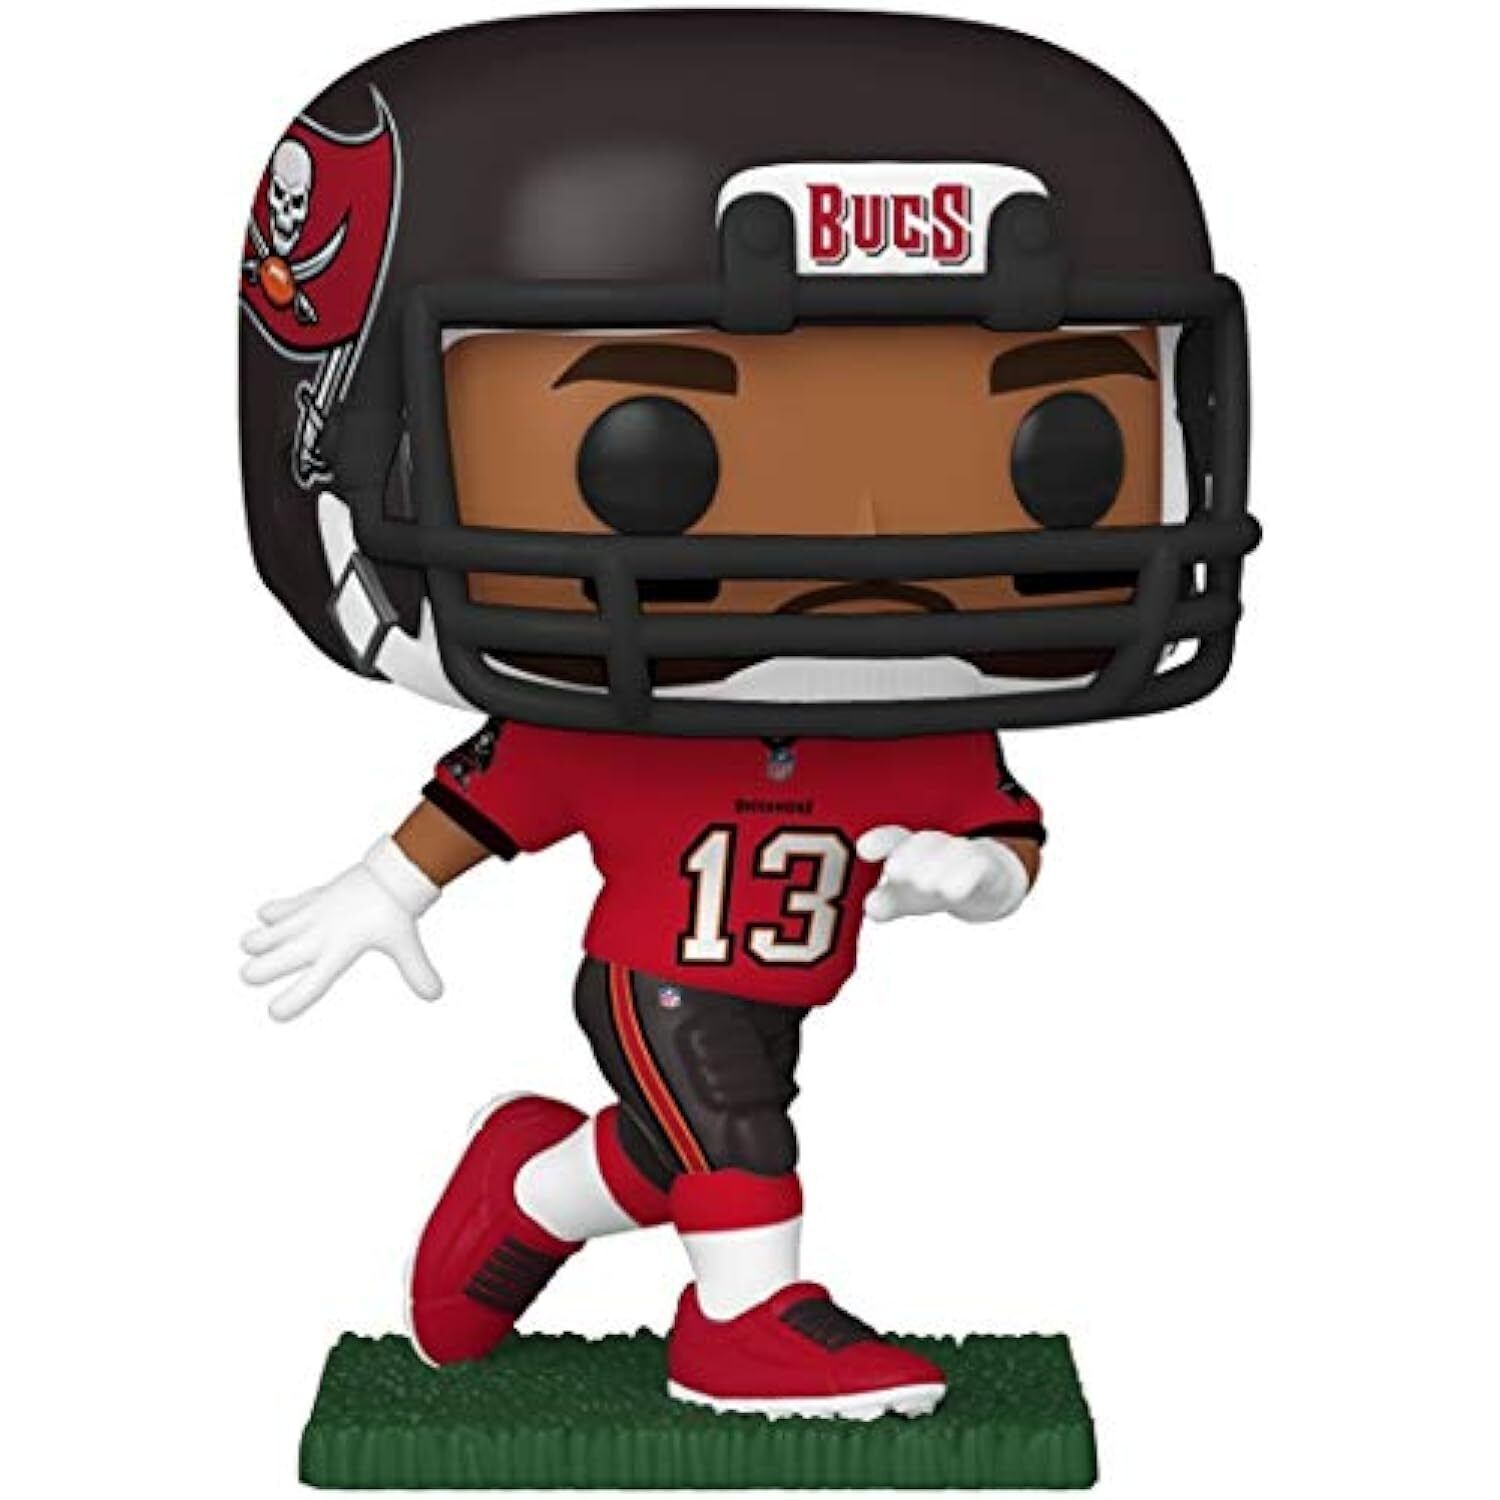 New In Damaged Box Funko POP NFL: Tampa Bay - Mike Evans